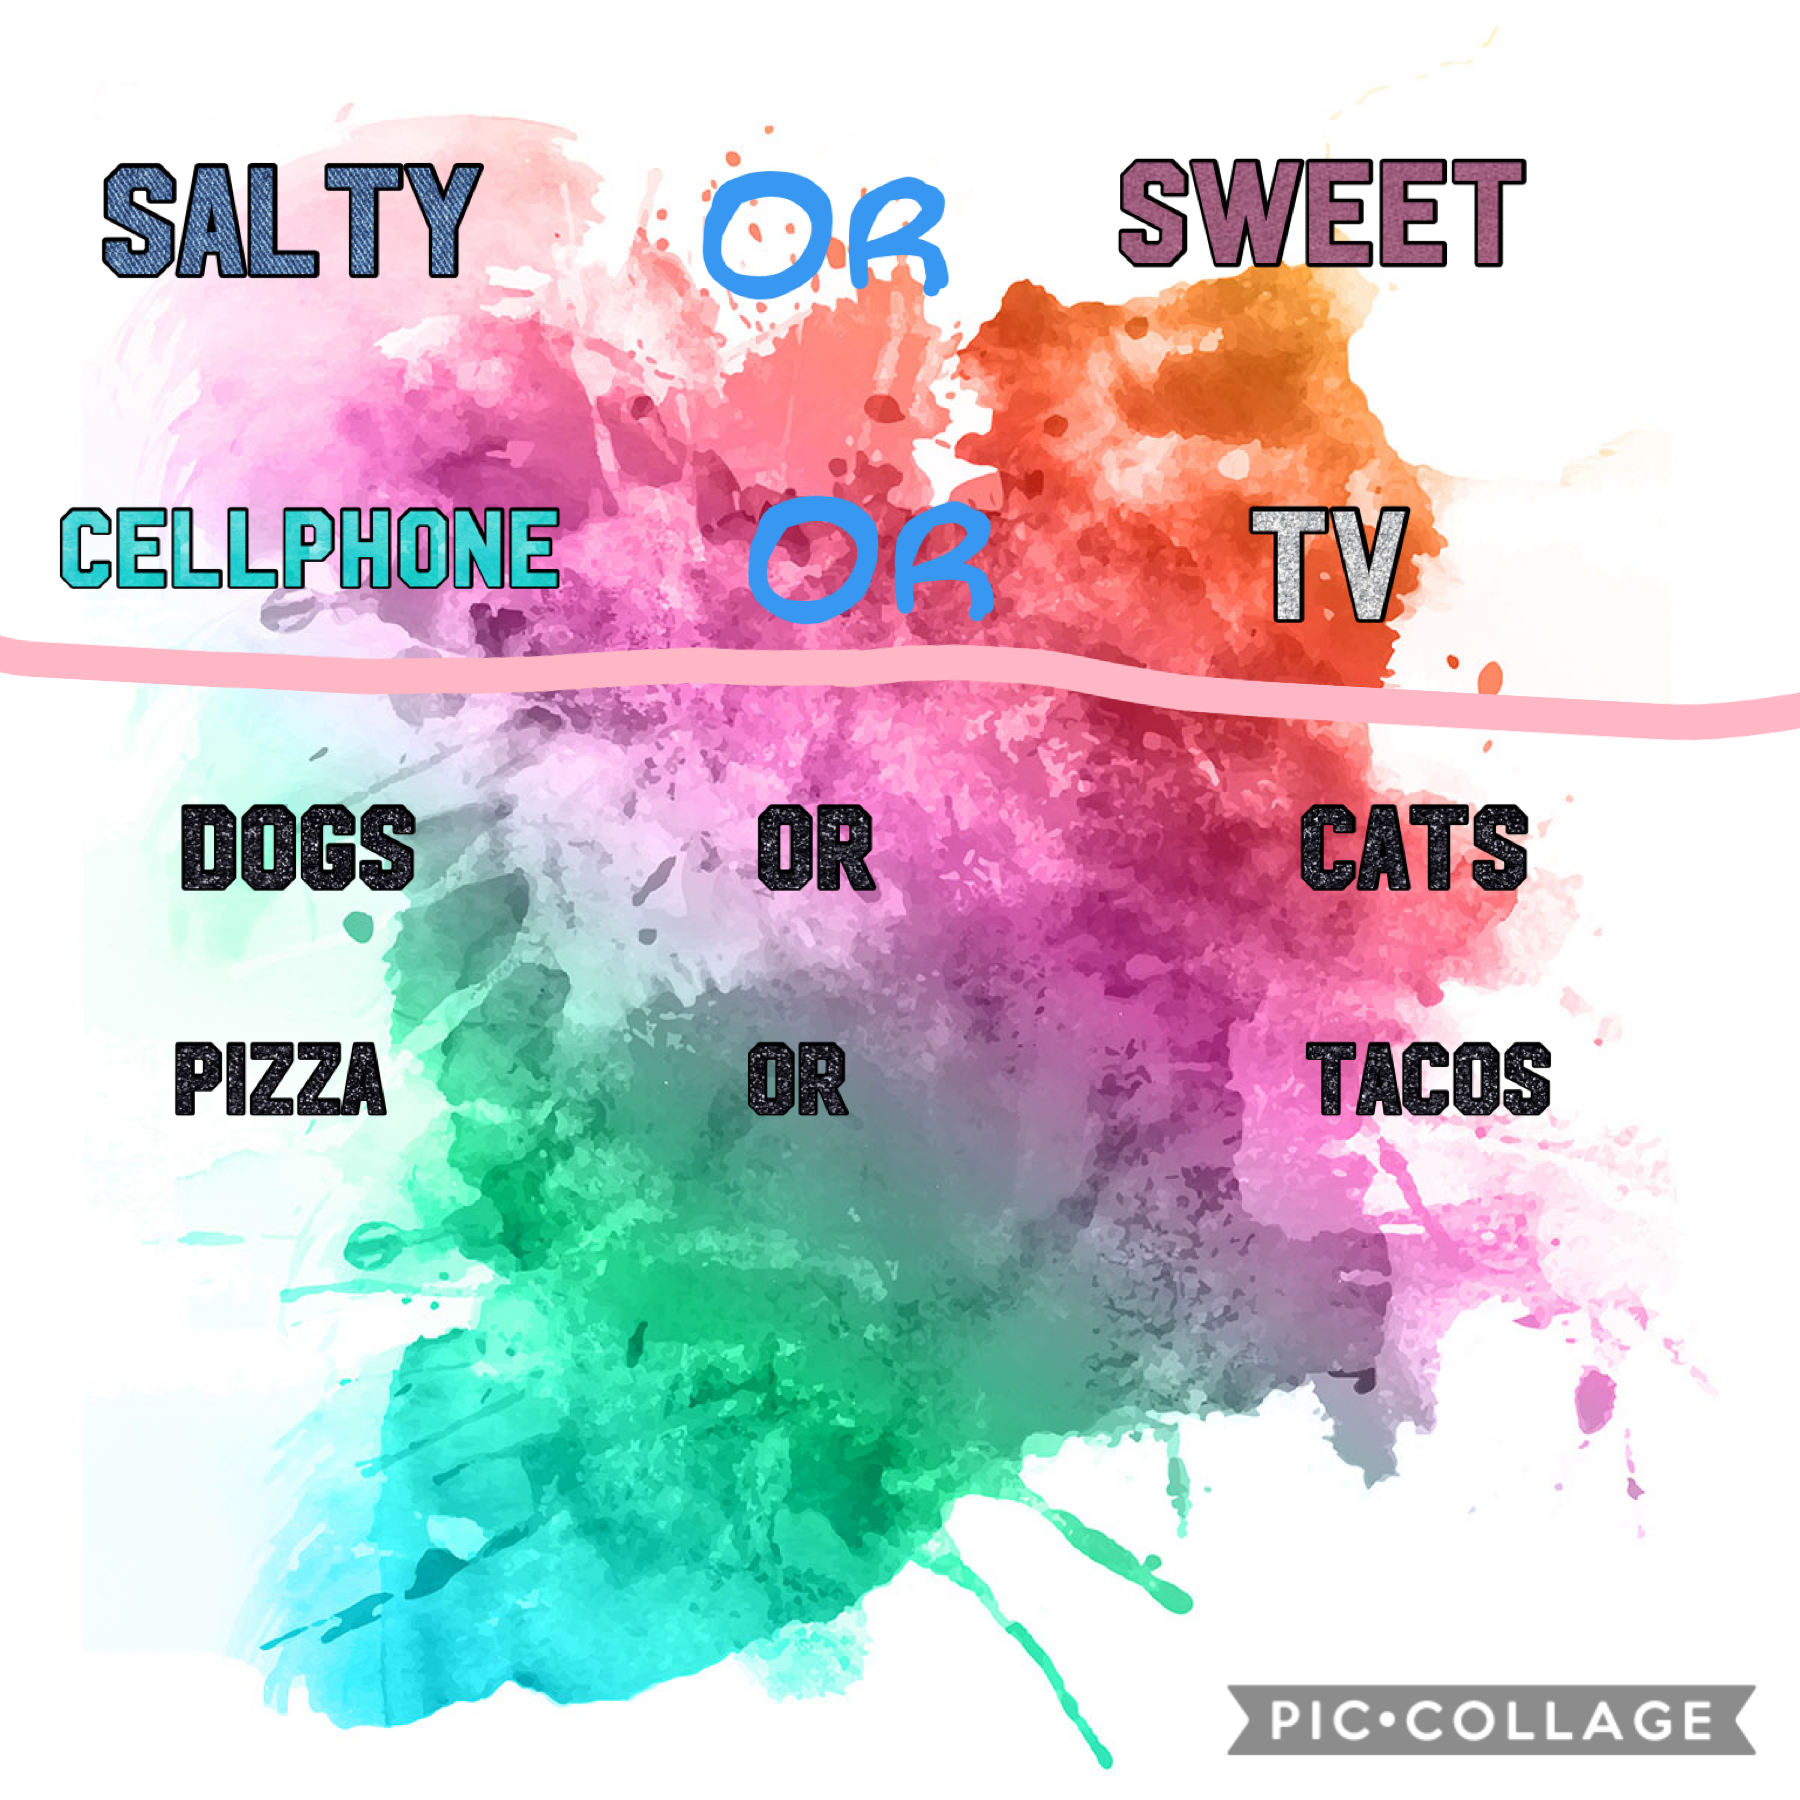 What do you preferred?